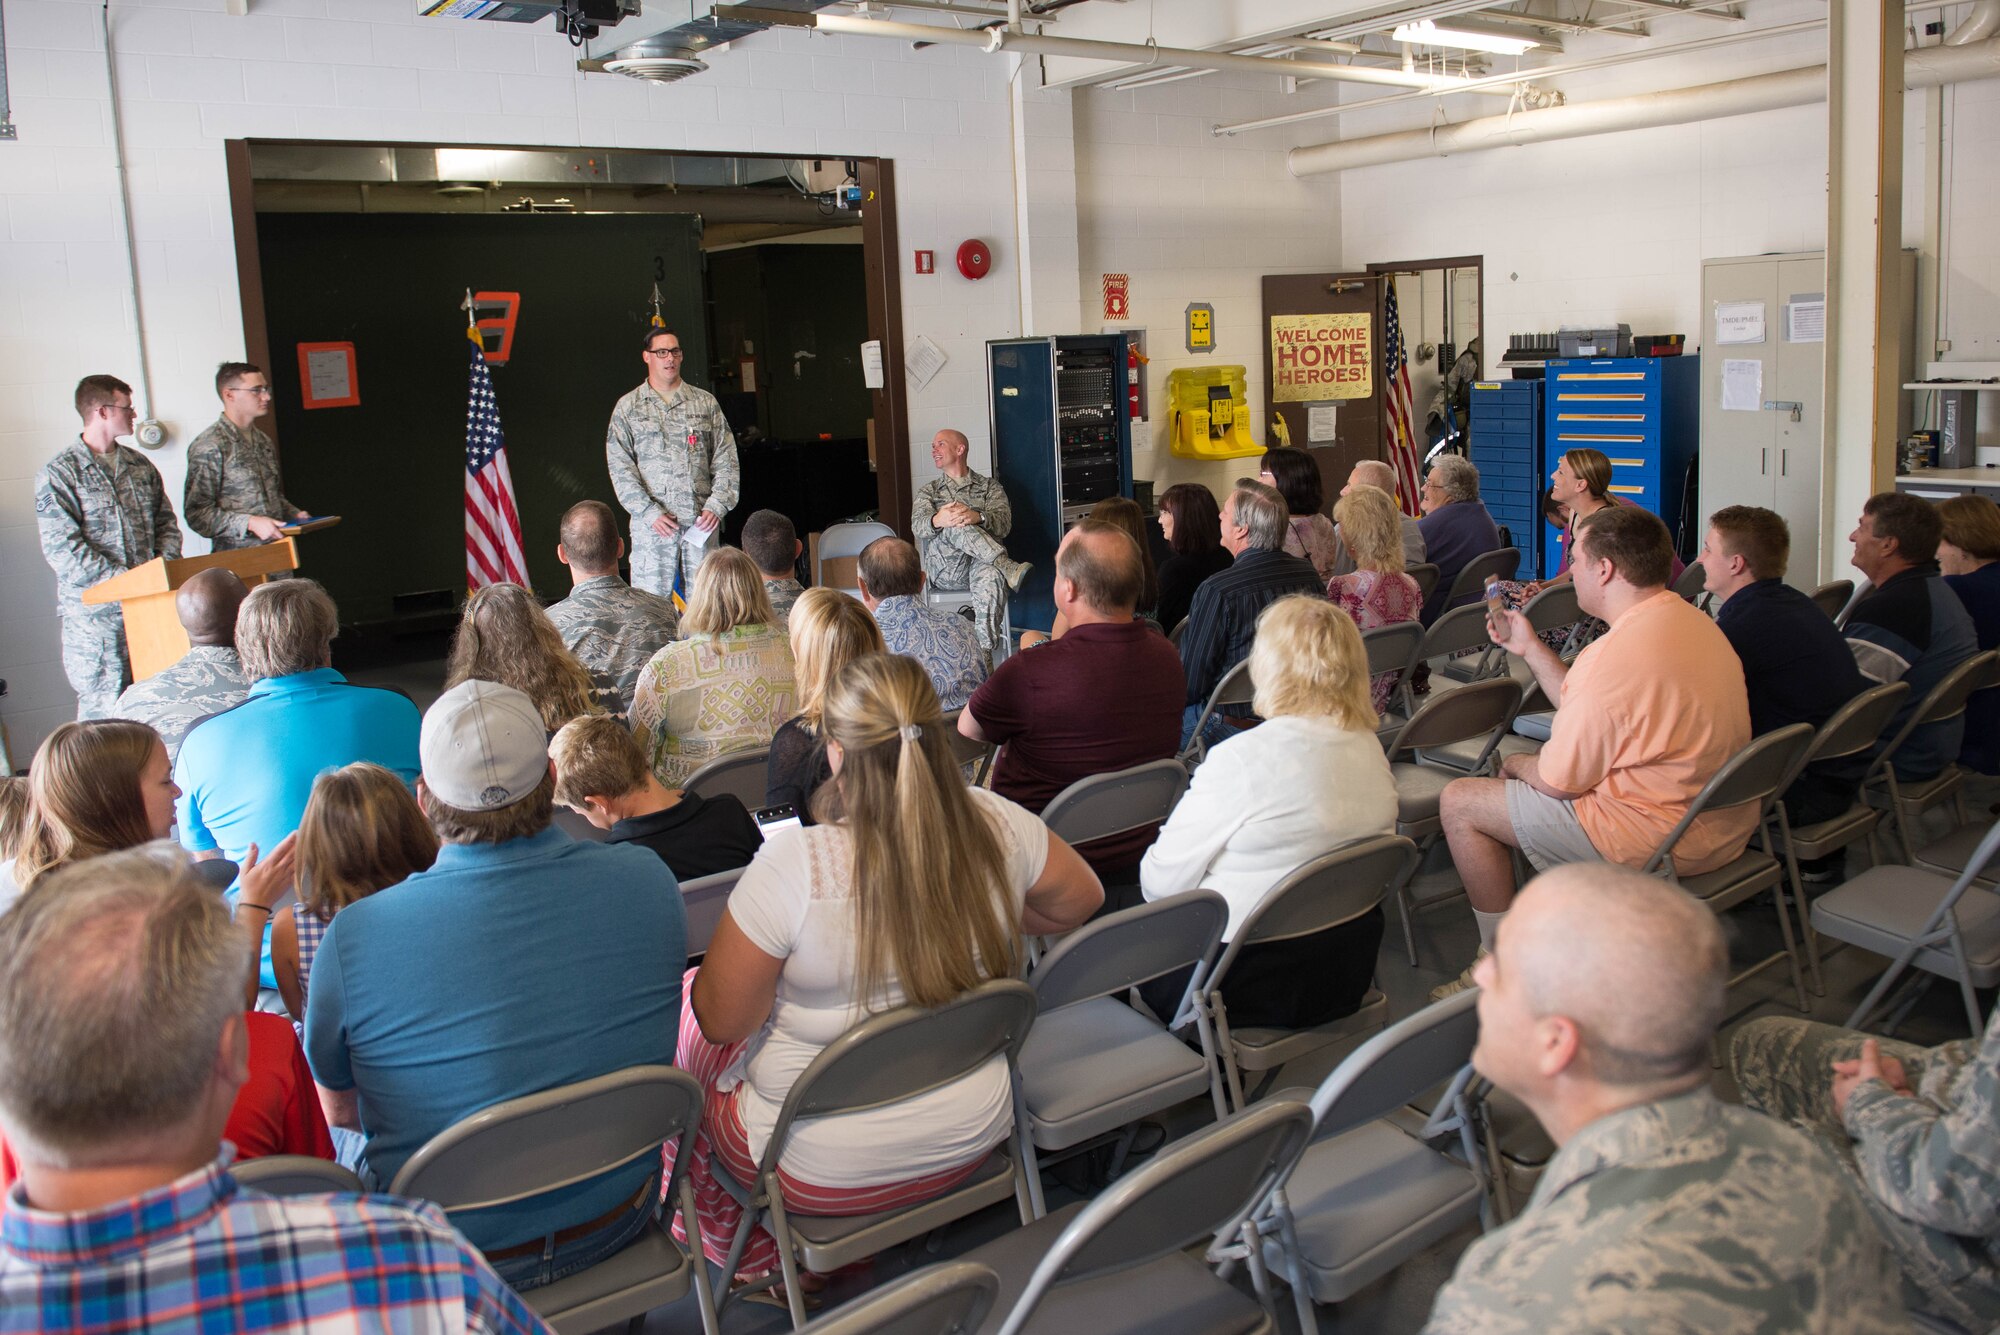 Tech. Sgt. William Adams, 55th Strategic Communications Squadron tactical radio supervisor, speaks to an audience at his Bronze Star Medal presentation ceremony Aug. 7, 2018, at Offutt Air Force Base, Nebraska. Adams was awarded the Bronze Star Medal for meritorious achievement during a yearlong deployment at Kandahar Airfield, Afghanistan. (U.S. Air Force photo by Zachary Hada)